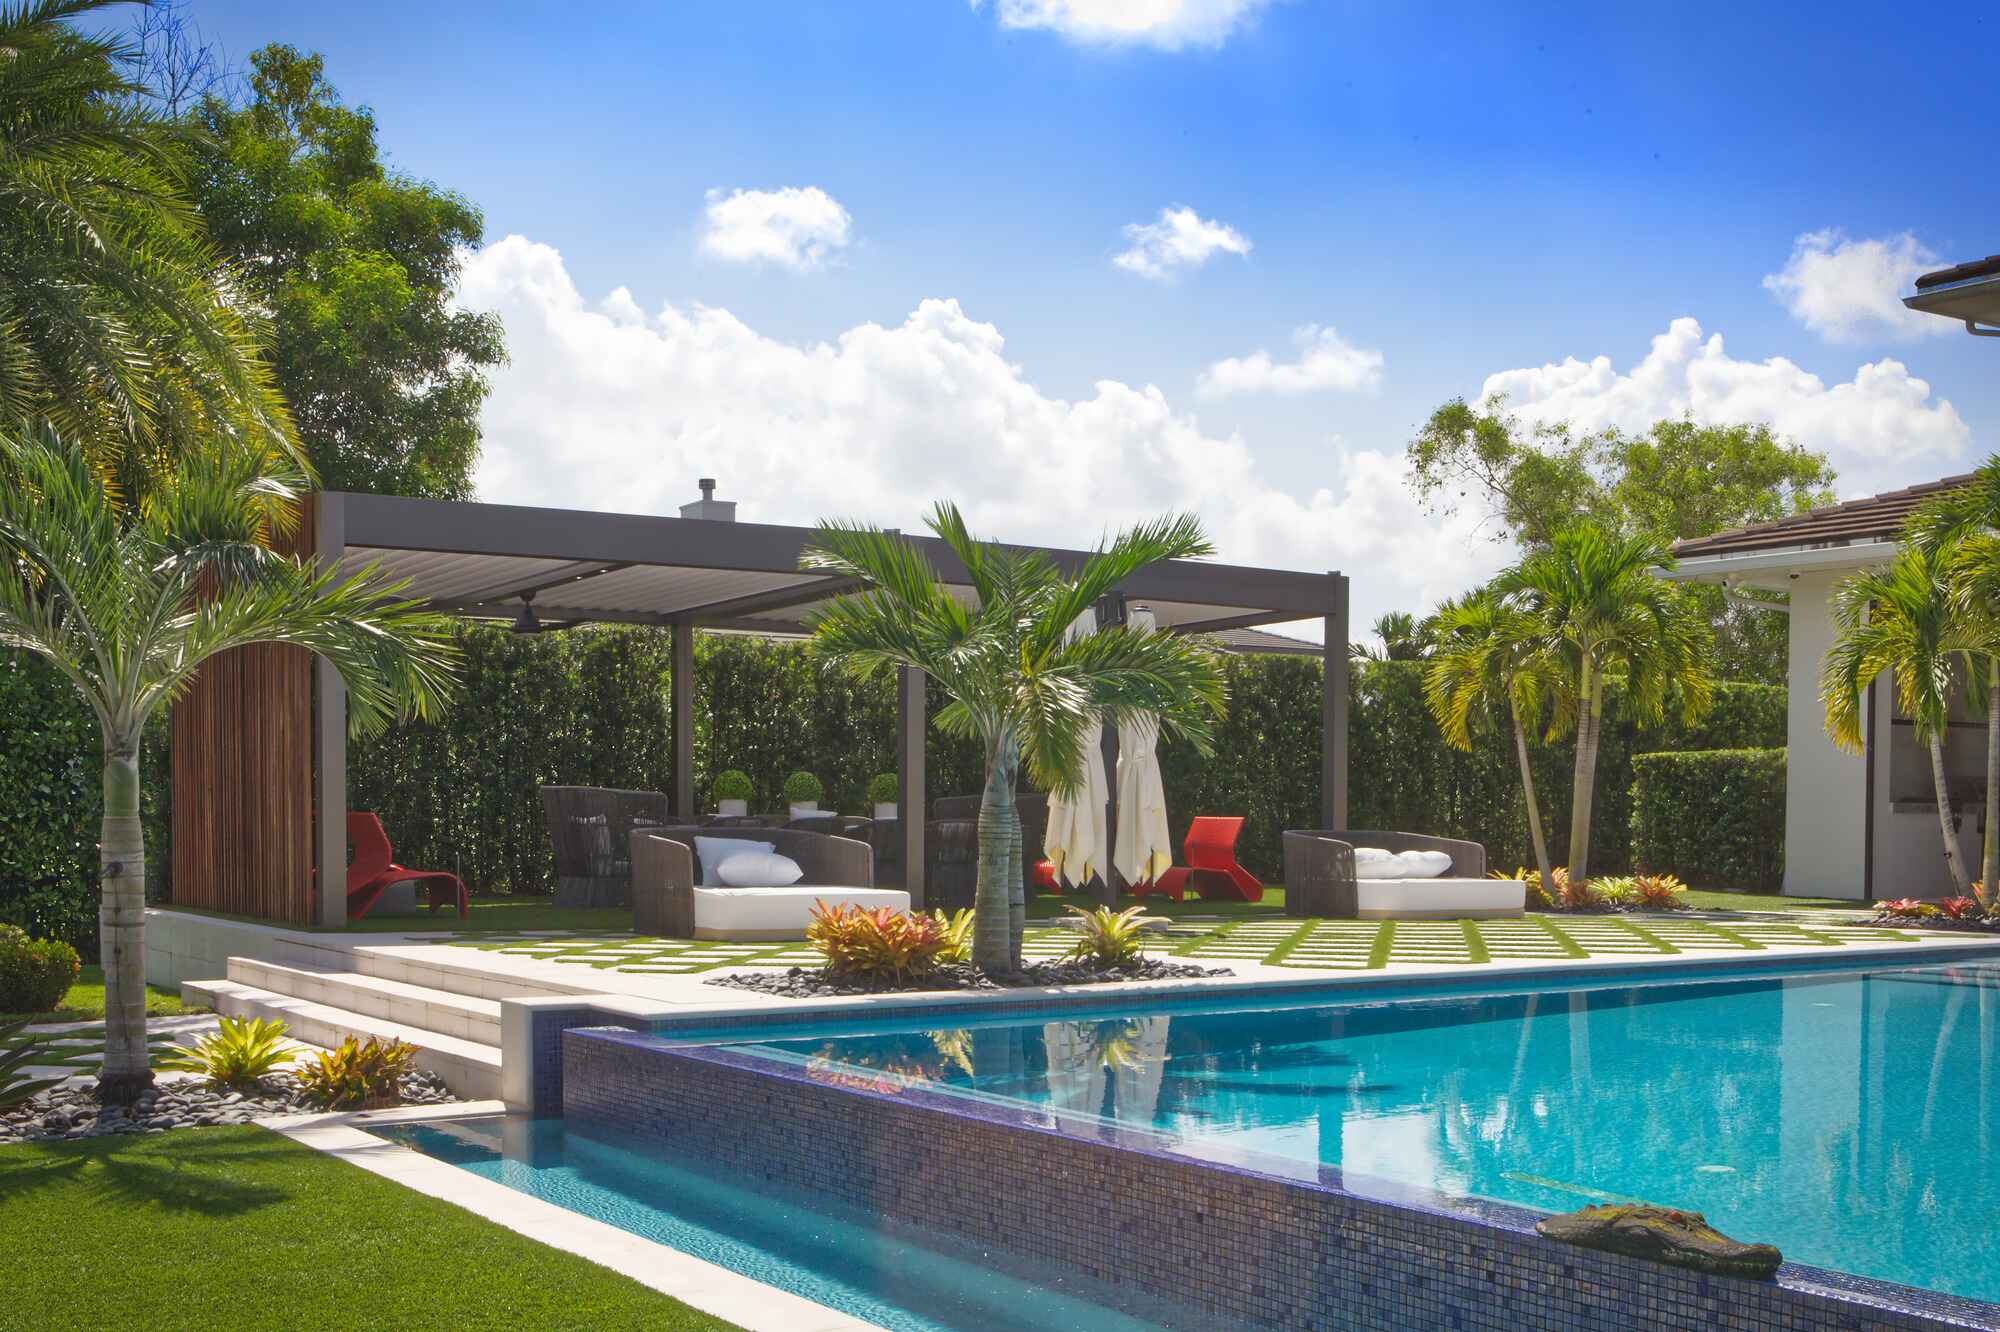 Luxurious Jacksonville Outdoor Oasis with an Infinity Pool and Motorized Pergola 